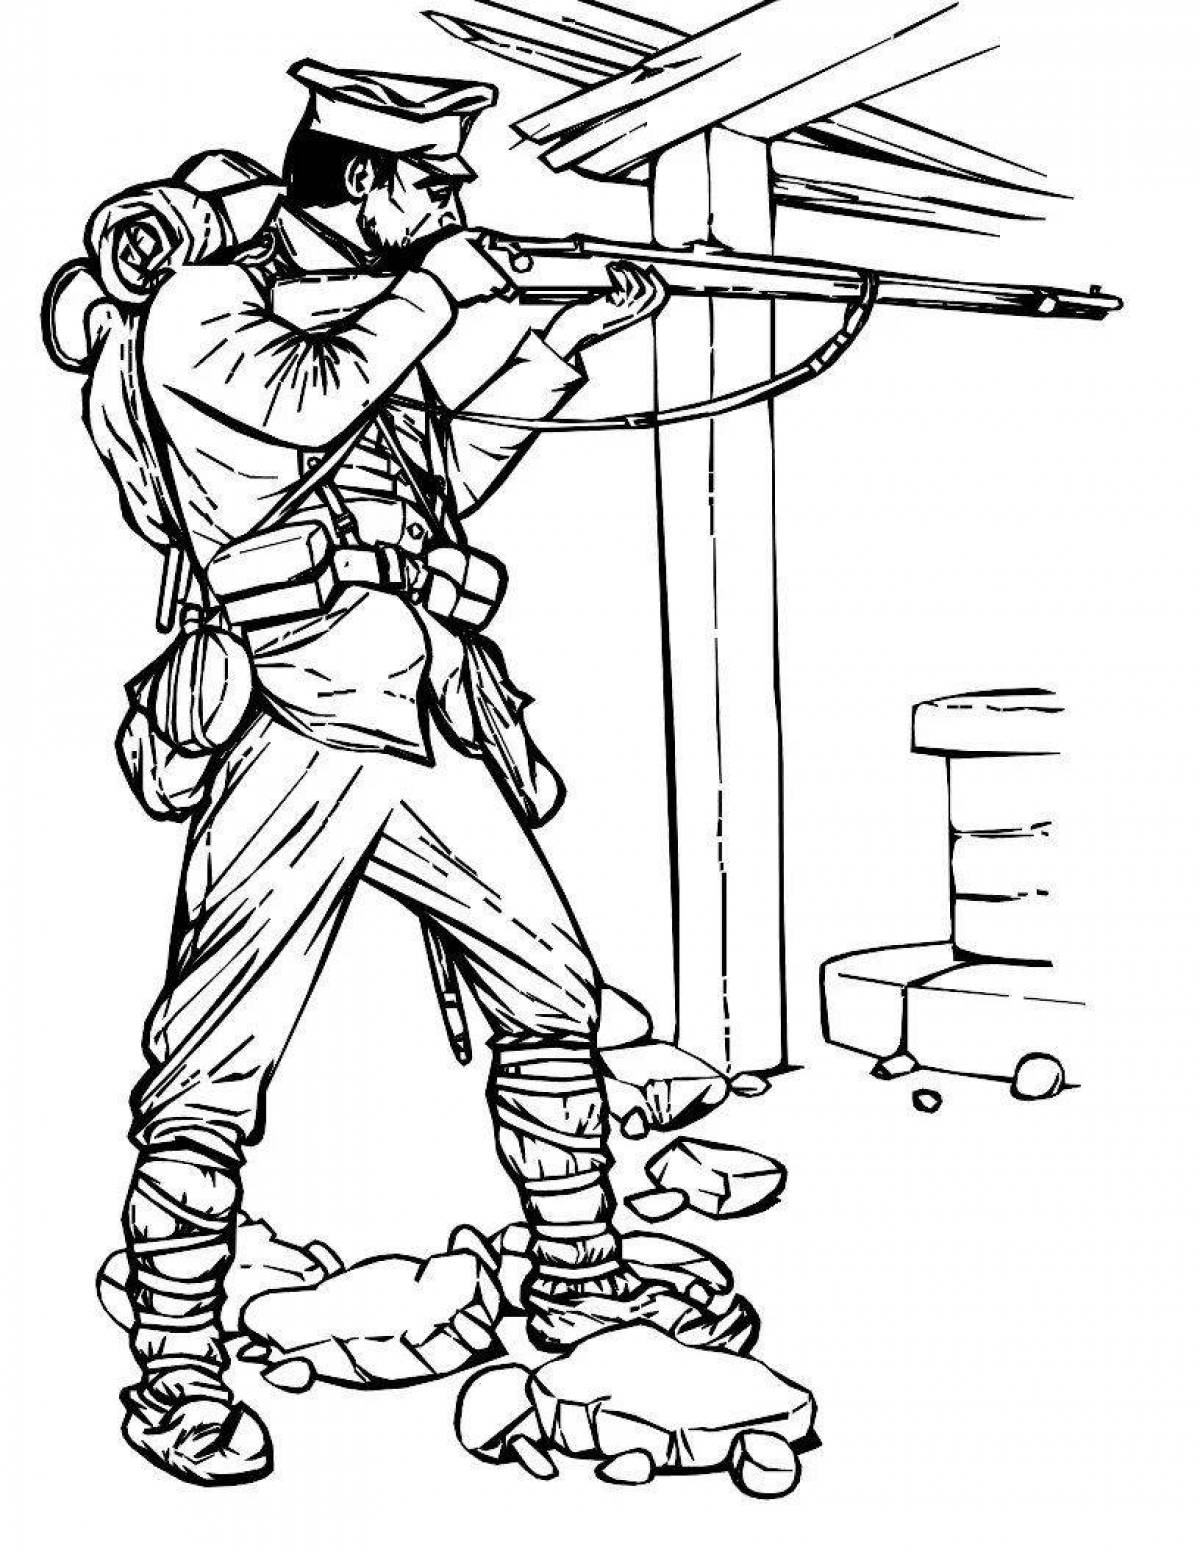 Majestic soldiers coloring pages for boys